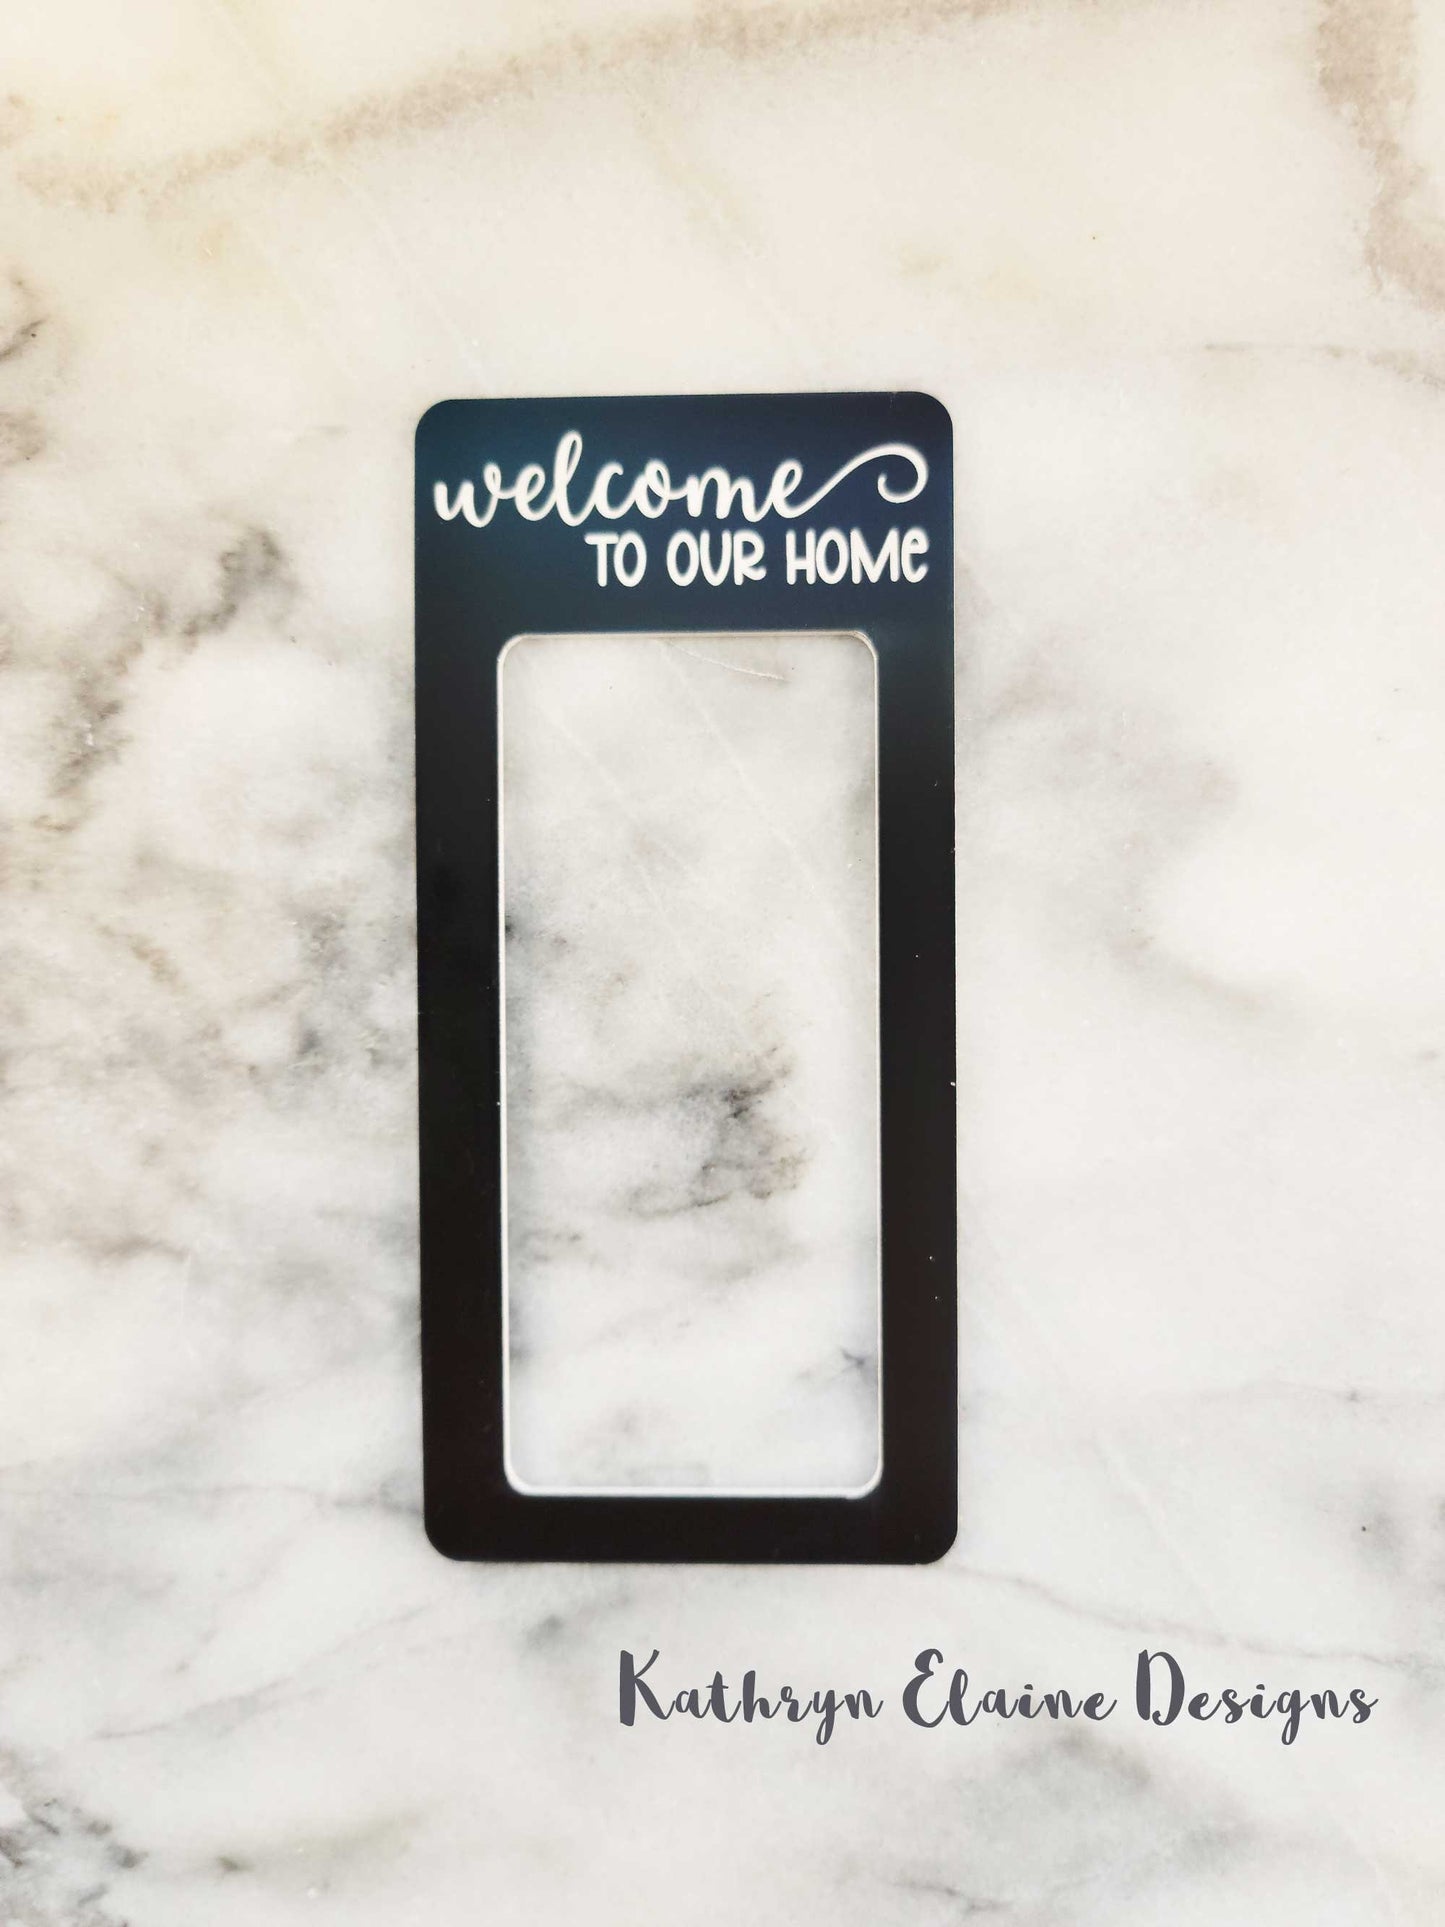 Black laminate doorbell surround stating Welcome to our home in white lettering on marble background